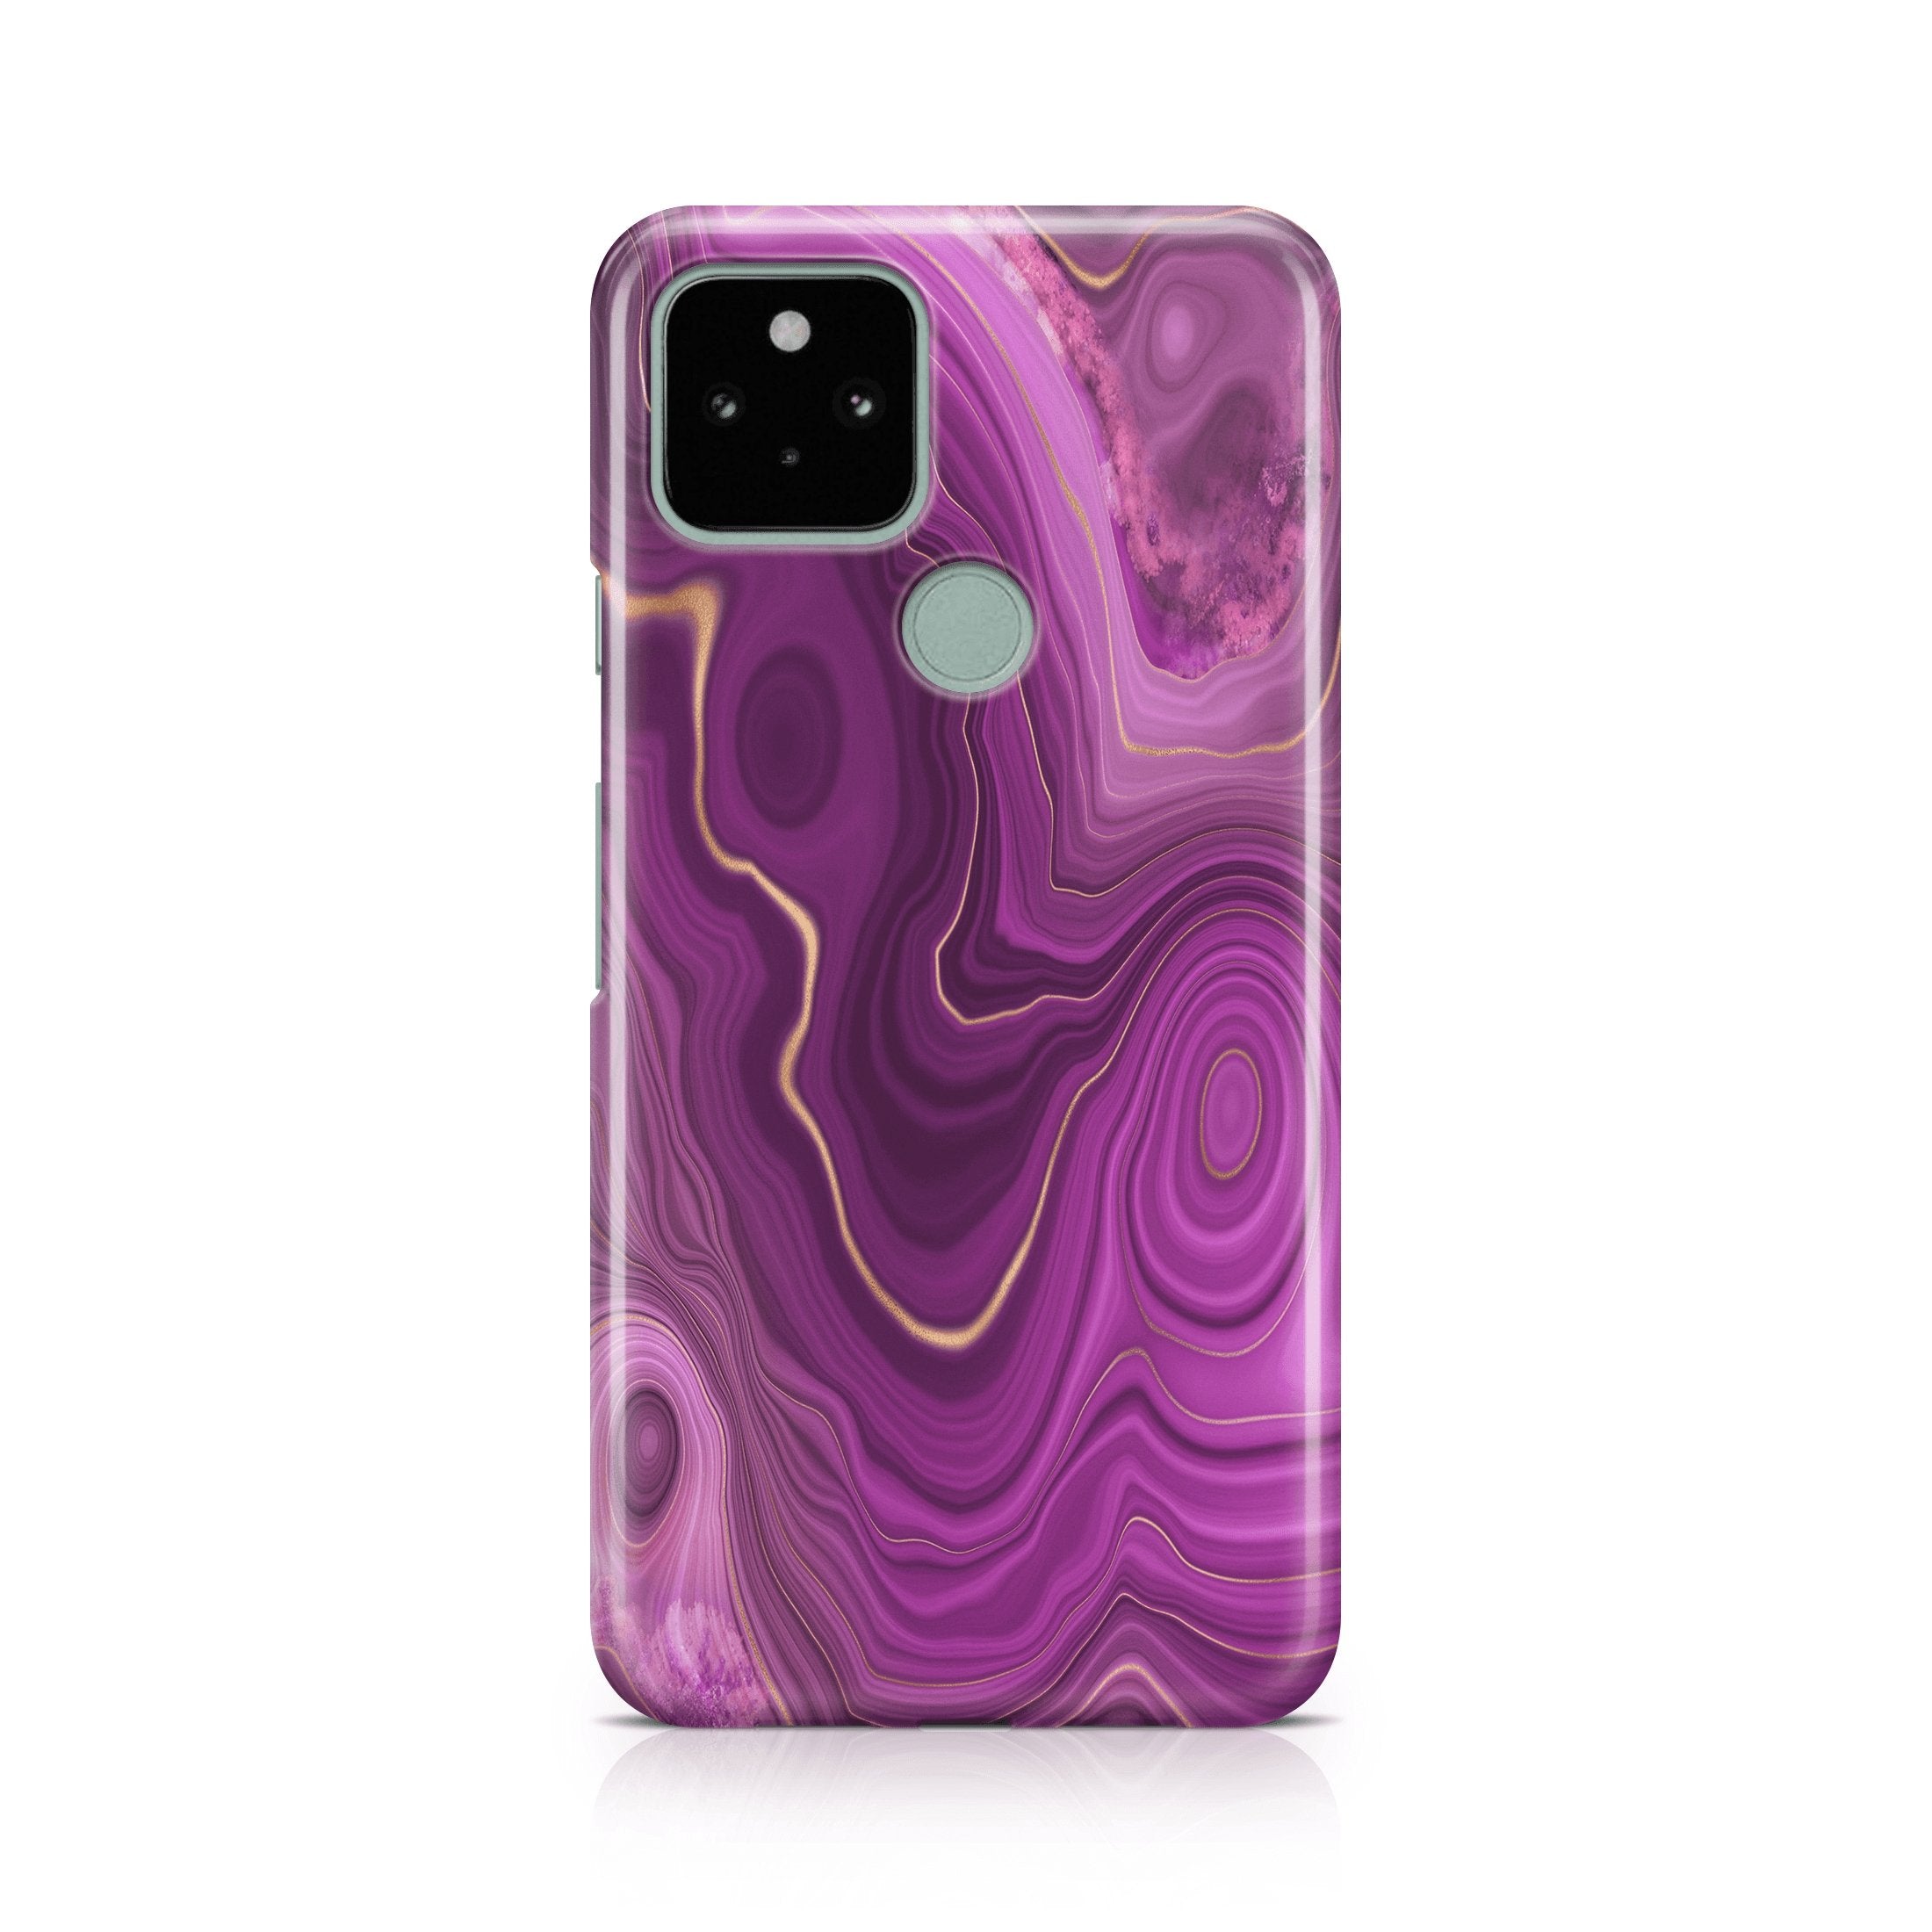 Amethyst Strata III - Google phone case designs by CaseSwagger